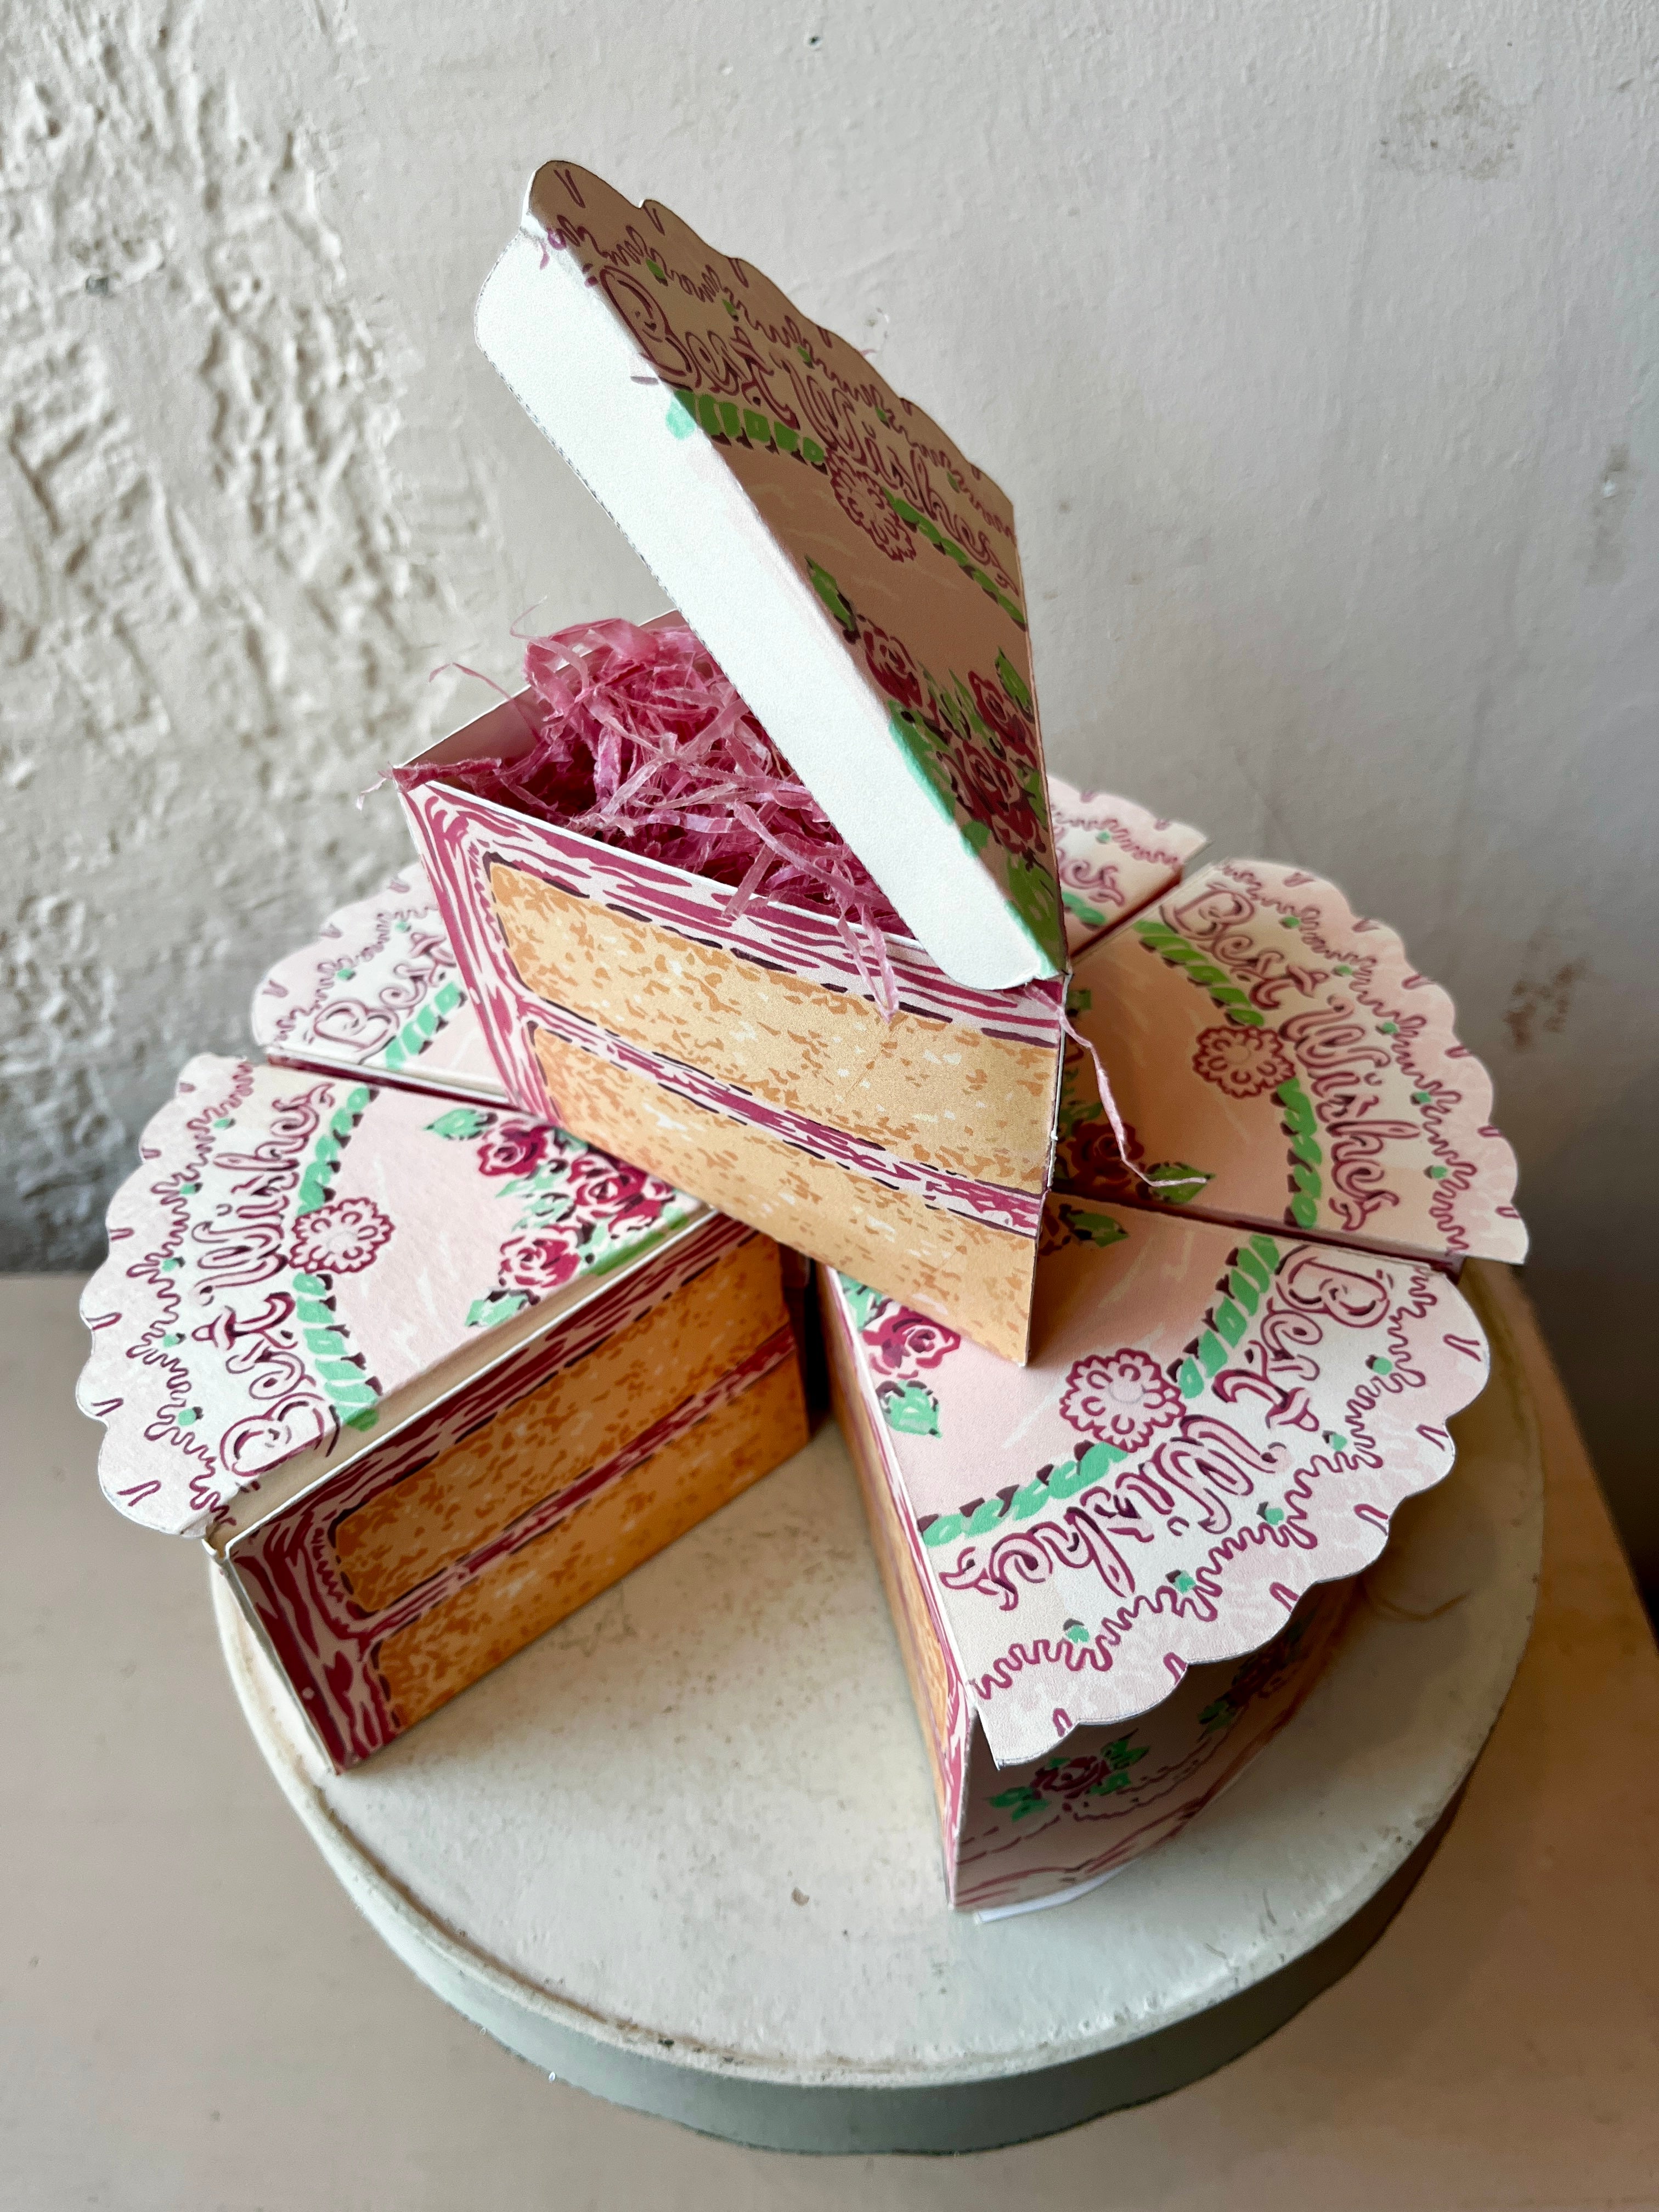 7 Best Wedding Cake Boxes to Take Slices Home | Emmaline Bride Wedding Blog  | Wedding cake boxes, Cool wedding cakes, Wedding cake favors